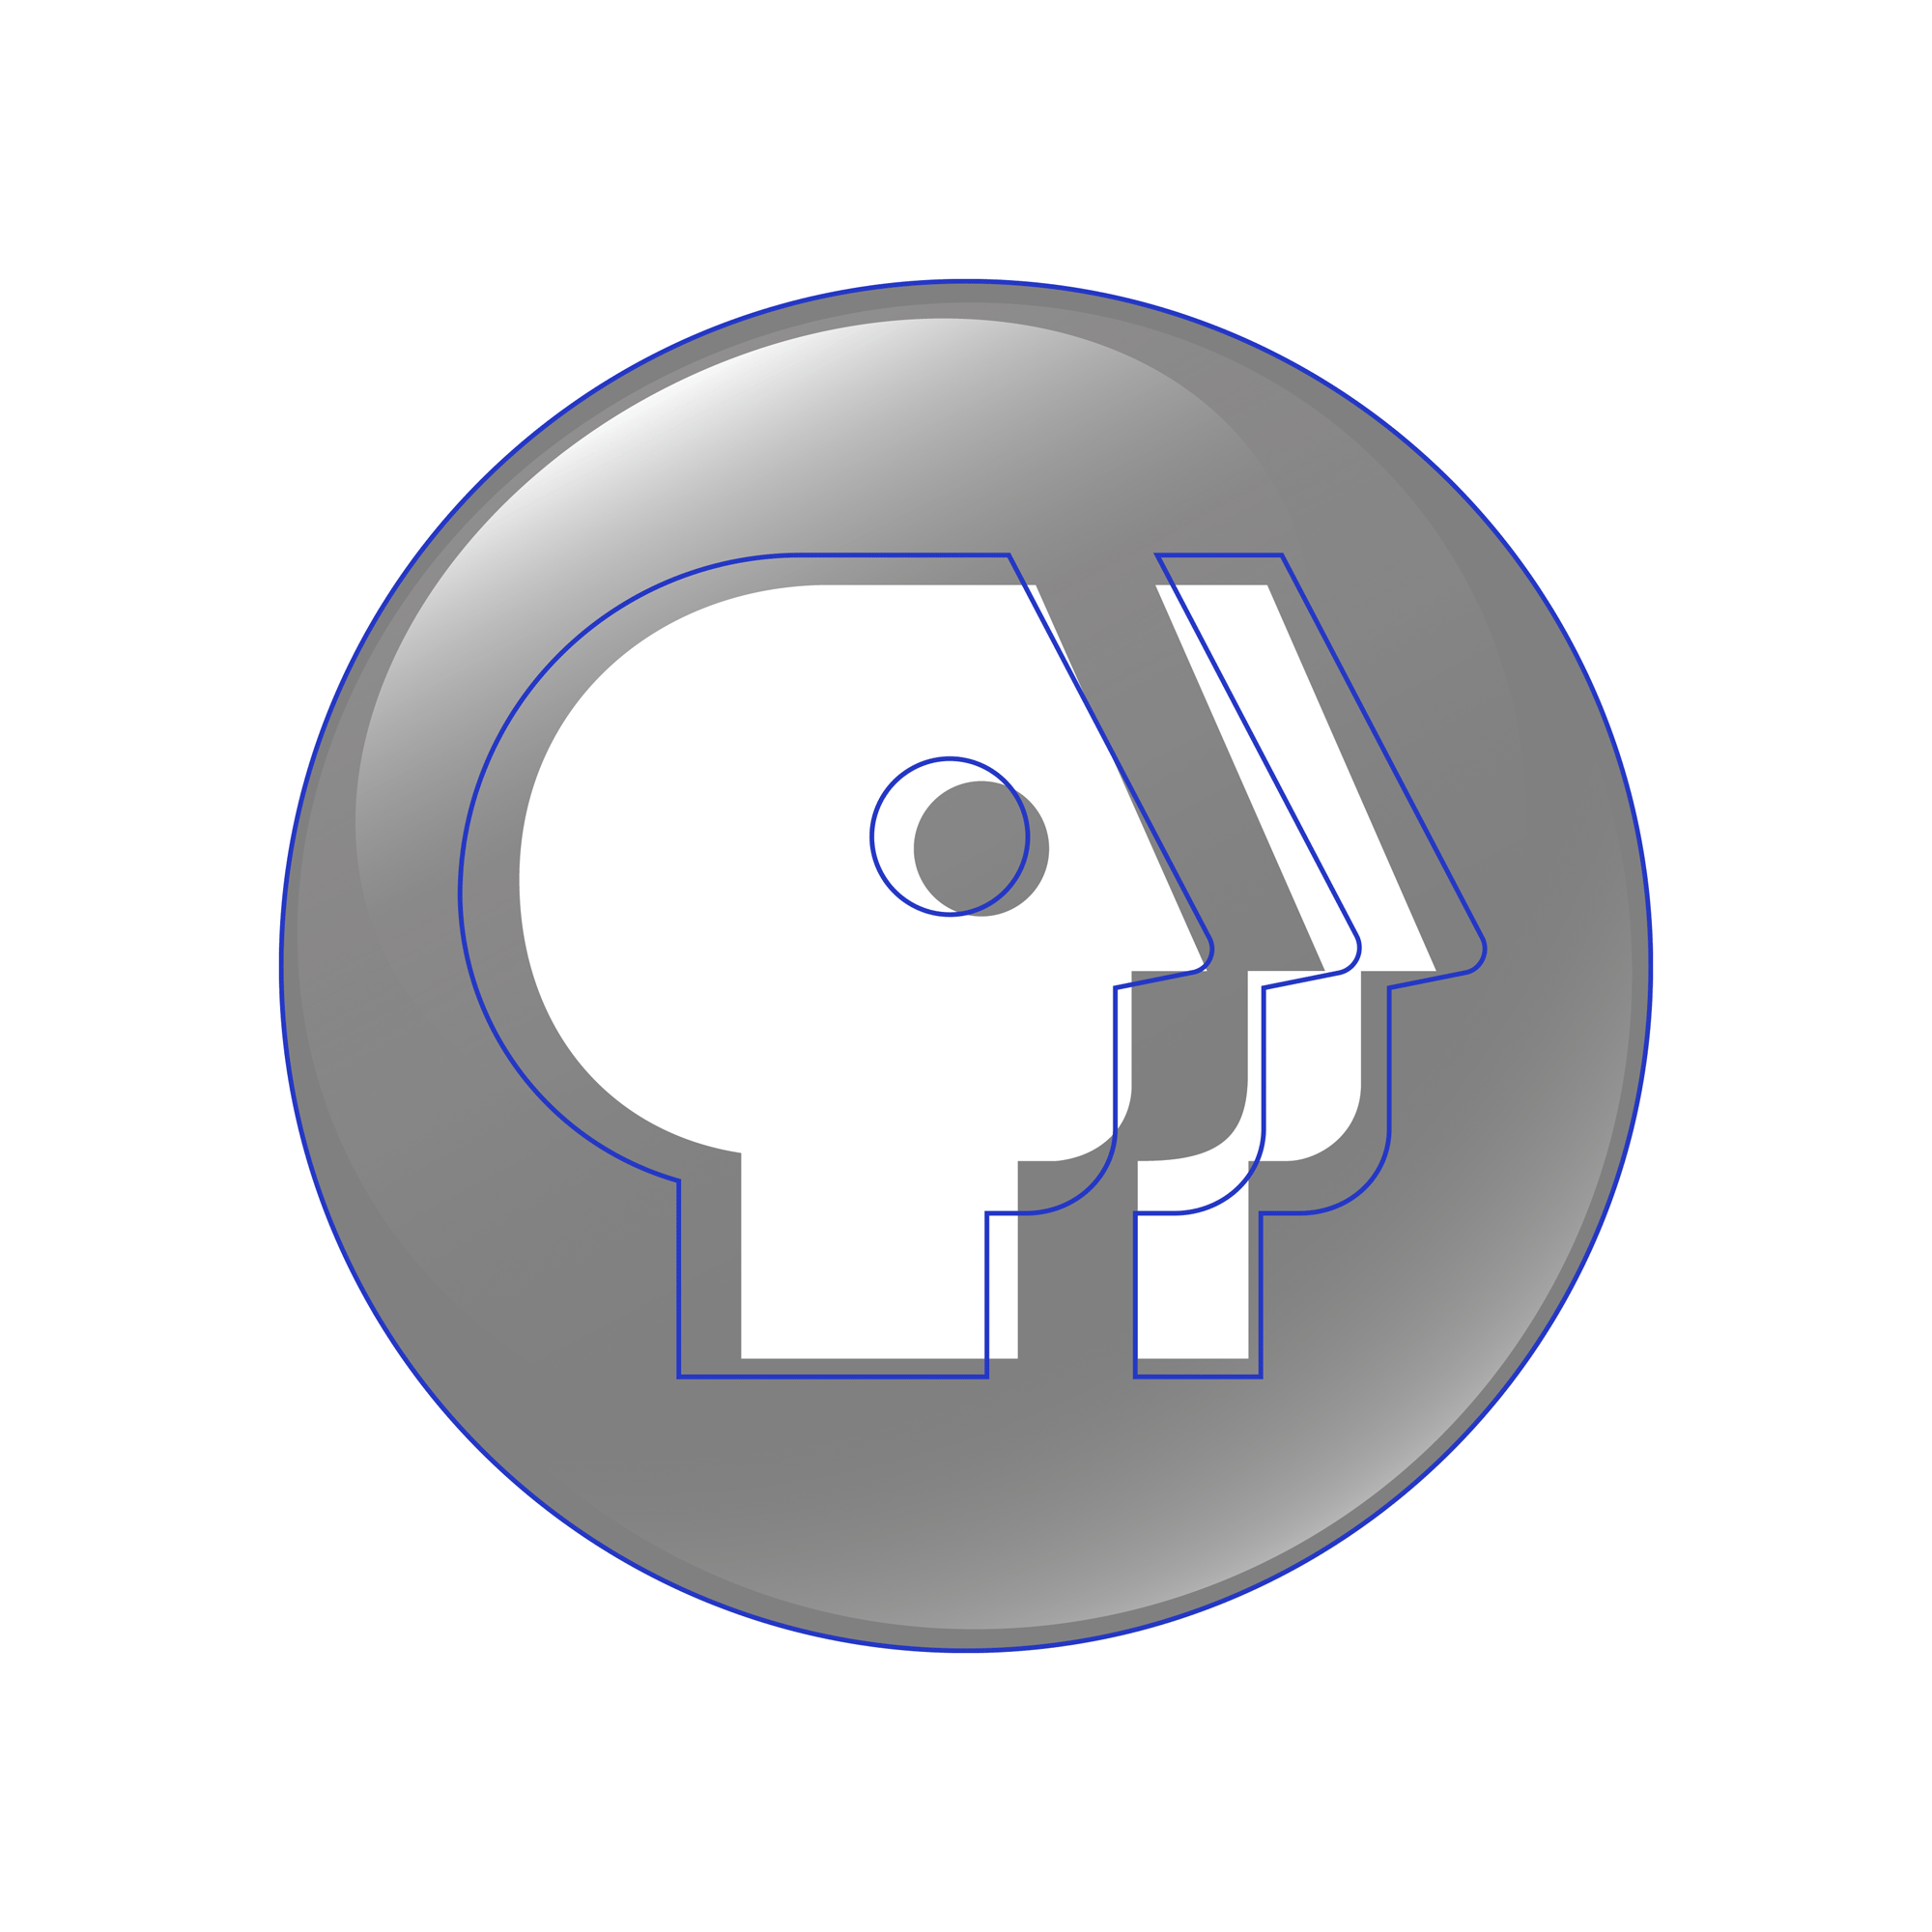 New Logo for PBS by Lippincott